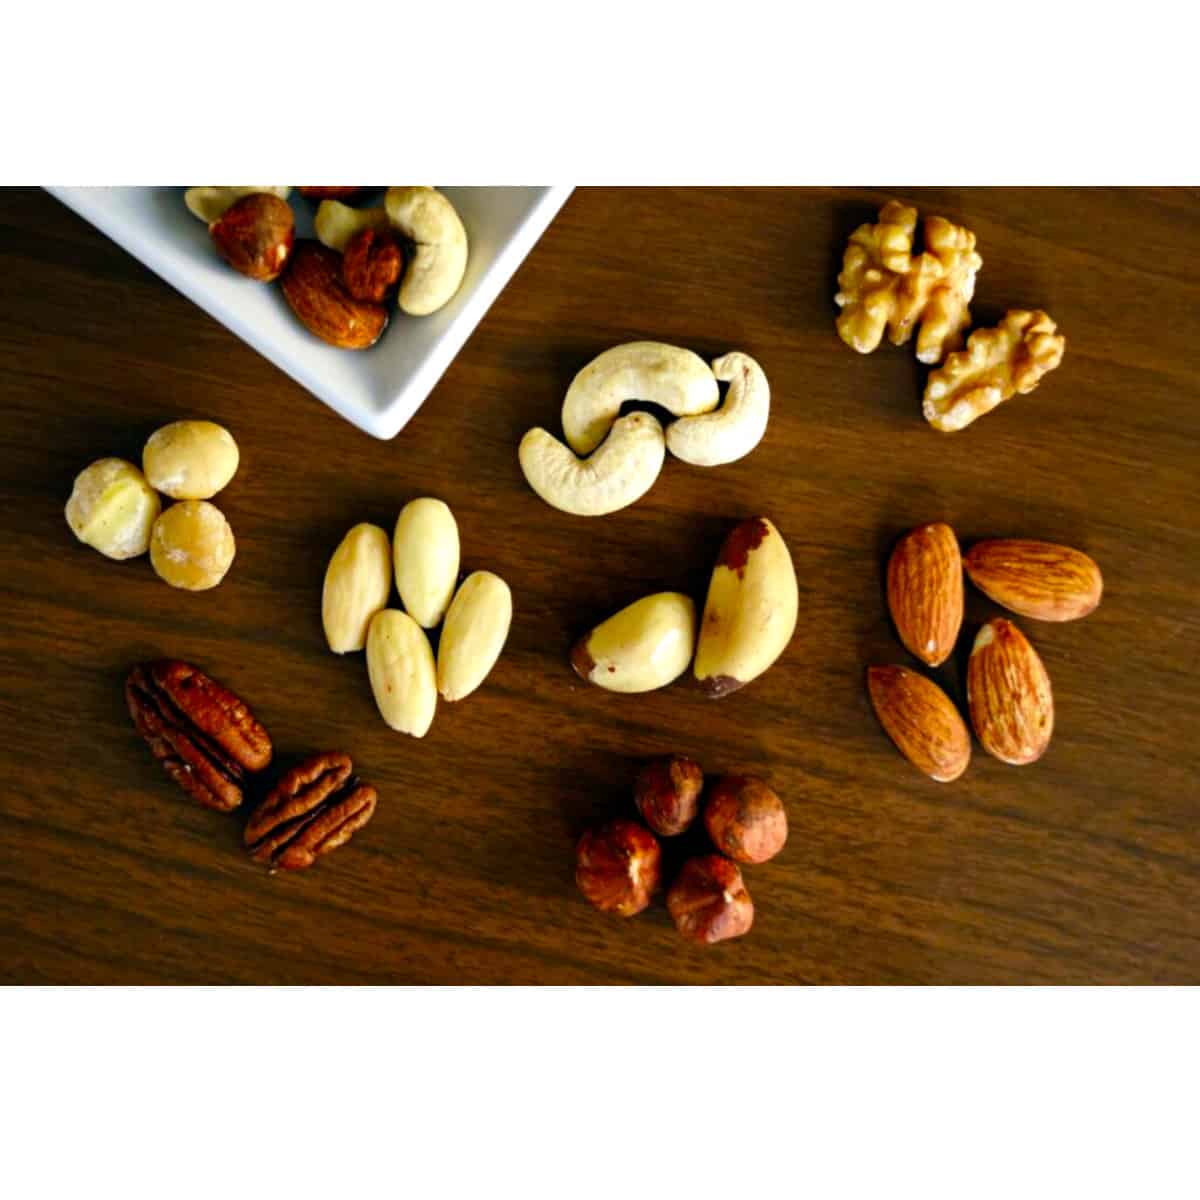 various nuts that have zinc in them naturally to boost immune system